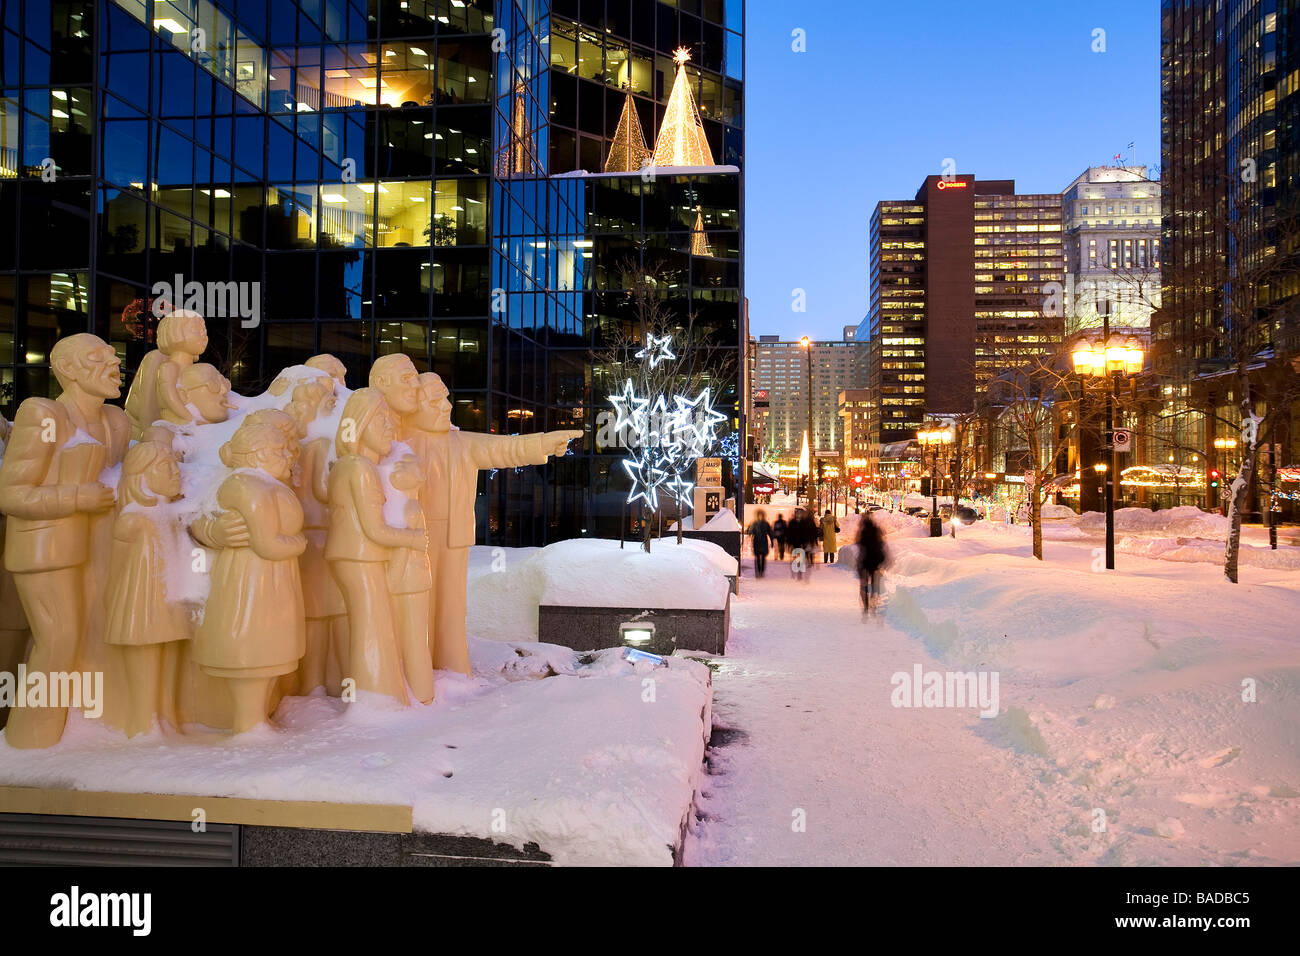 Canada, Quebec Province, Montreal, Christmas decoration on Avenue